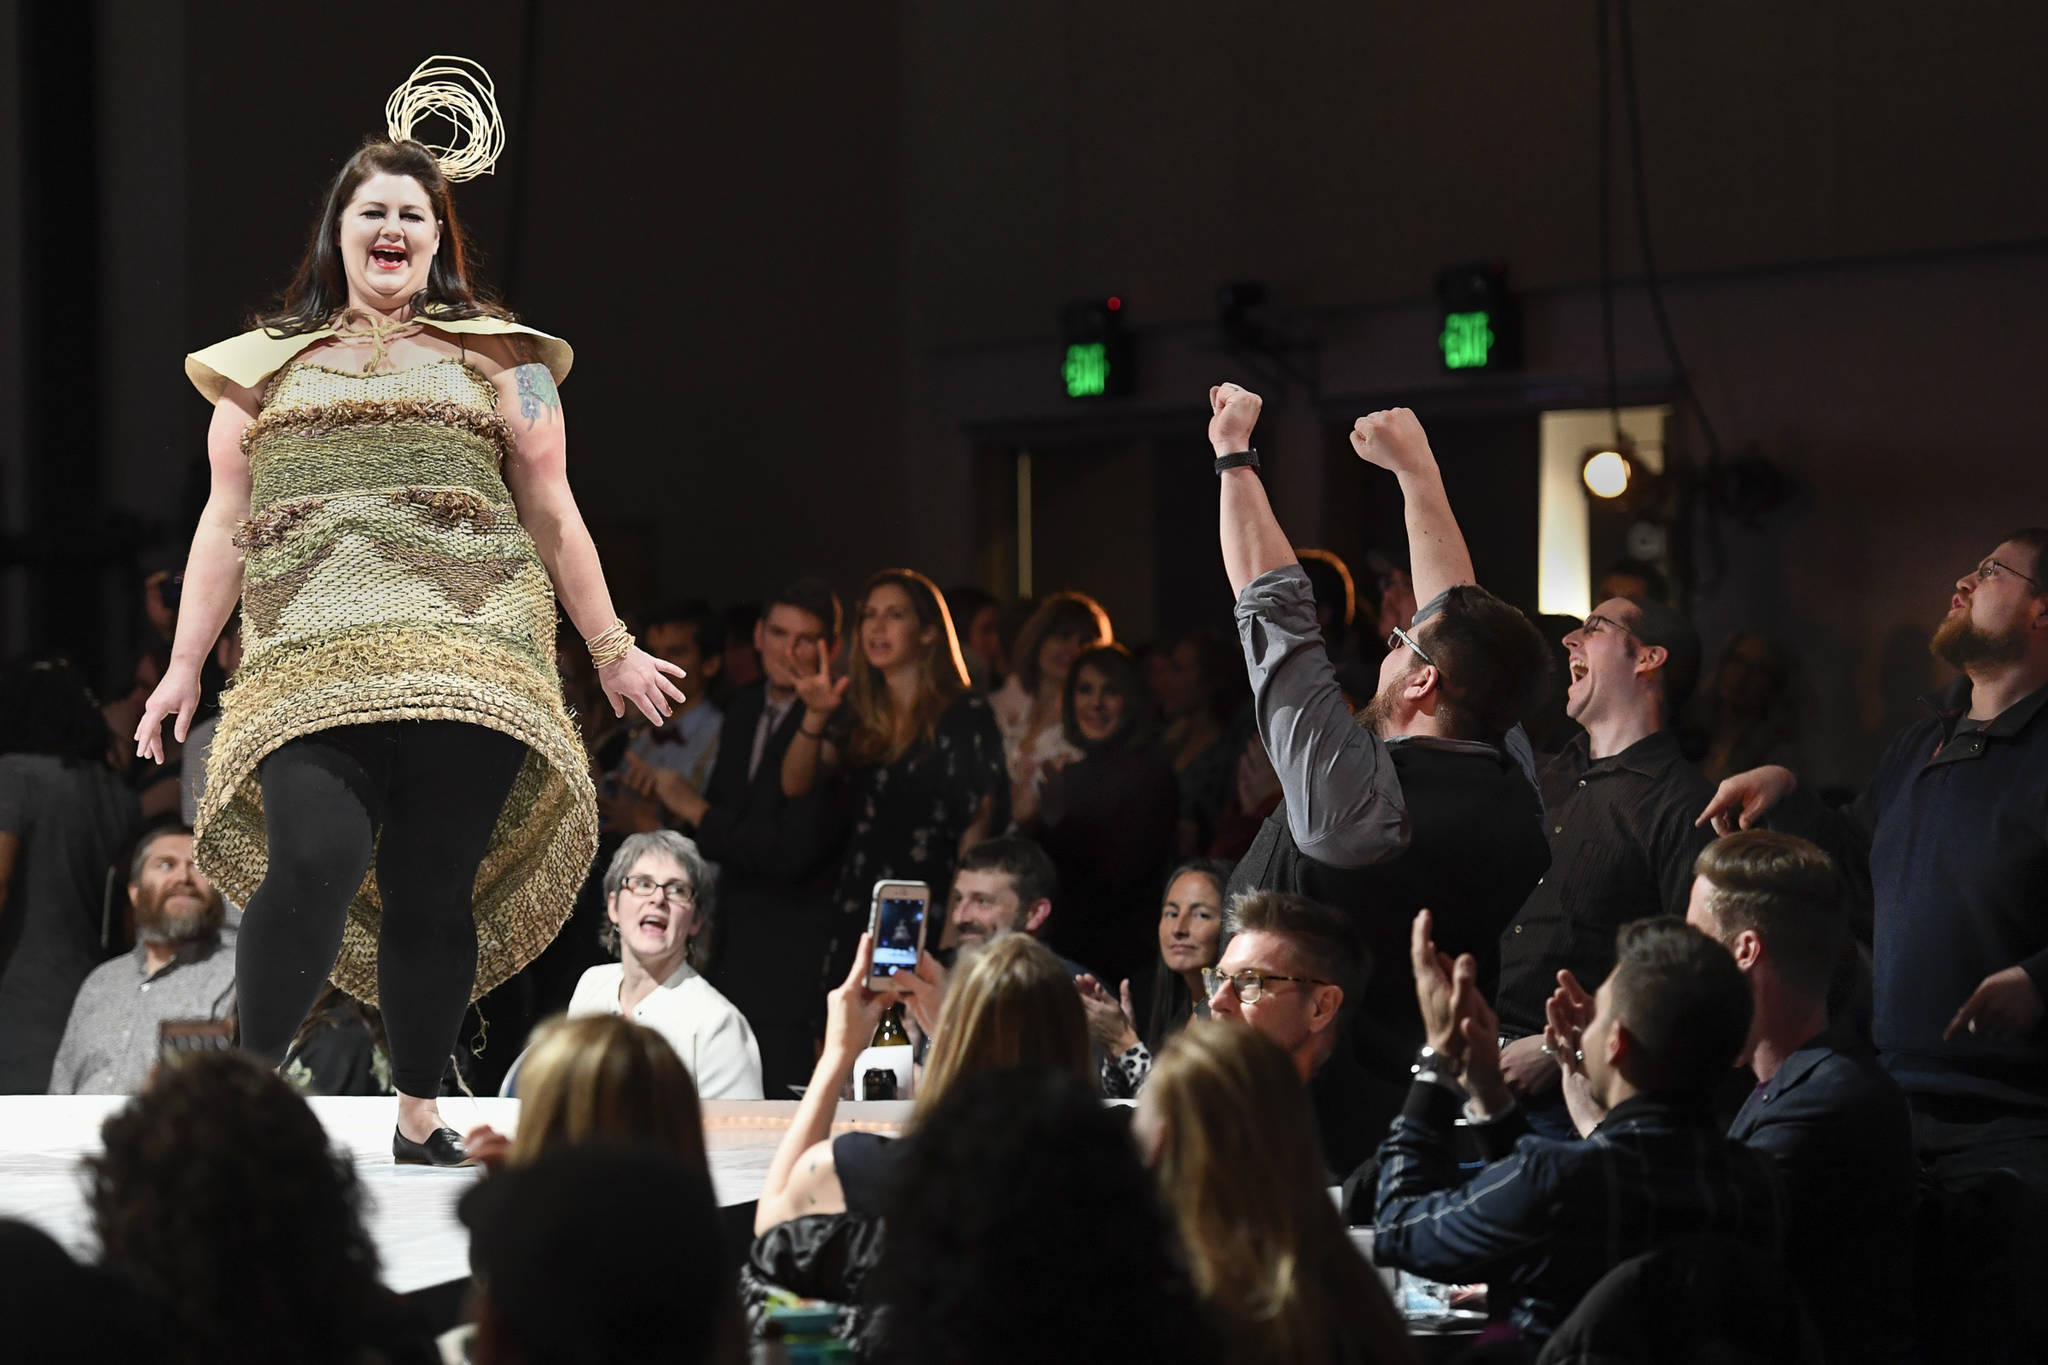 Fans of Jesse Riesenberger give her an enthusiastic cheer as she models Jessica Sullivan’s “Calm in the Wild” at the Wearable Art show at Centennial Hall on Saturday, Feb. 16, 2019. (Michael Penn | Capital City Weekly)